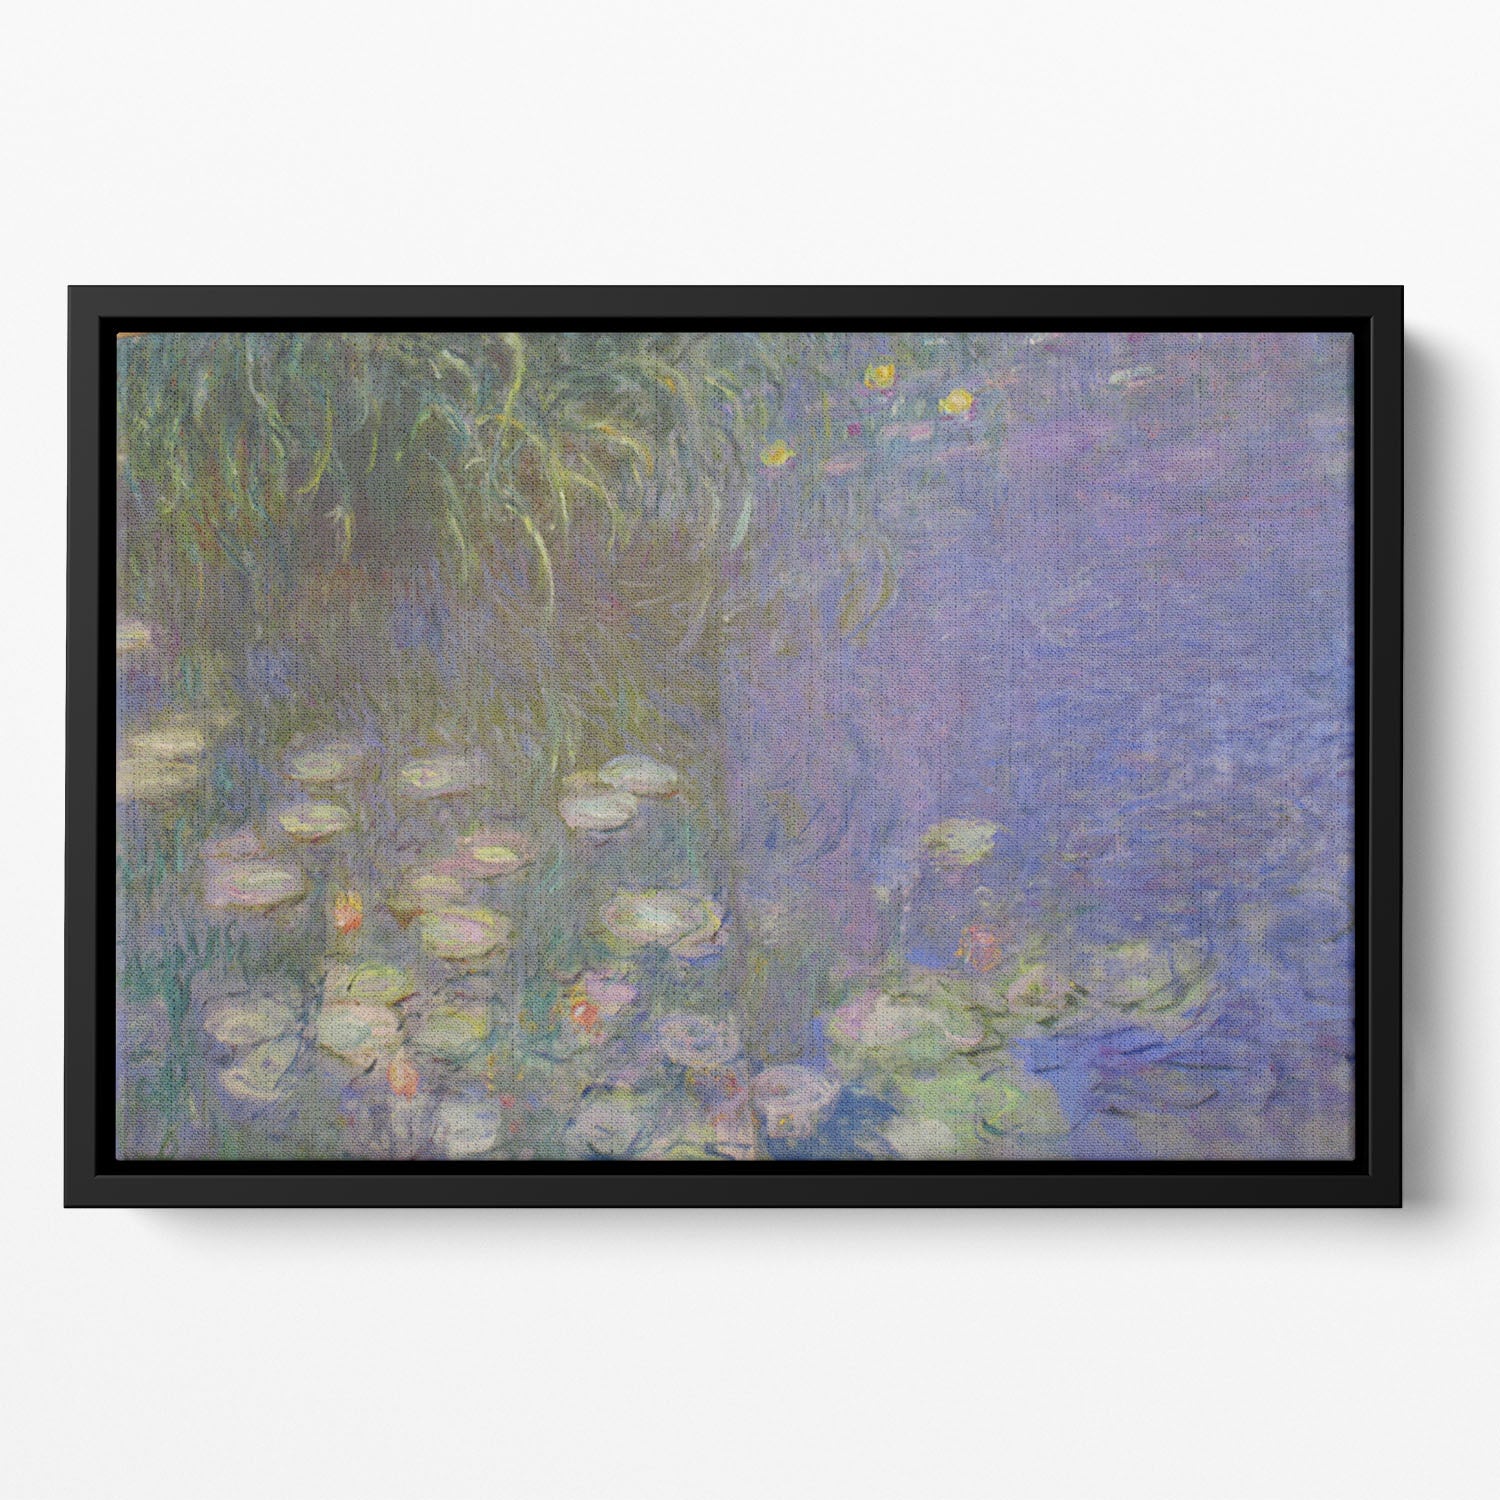 Water Lillies 13 by Monet Floating Framed Canvas